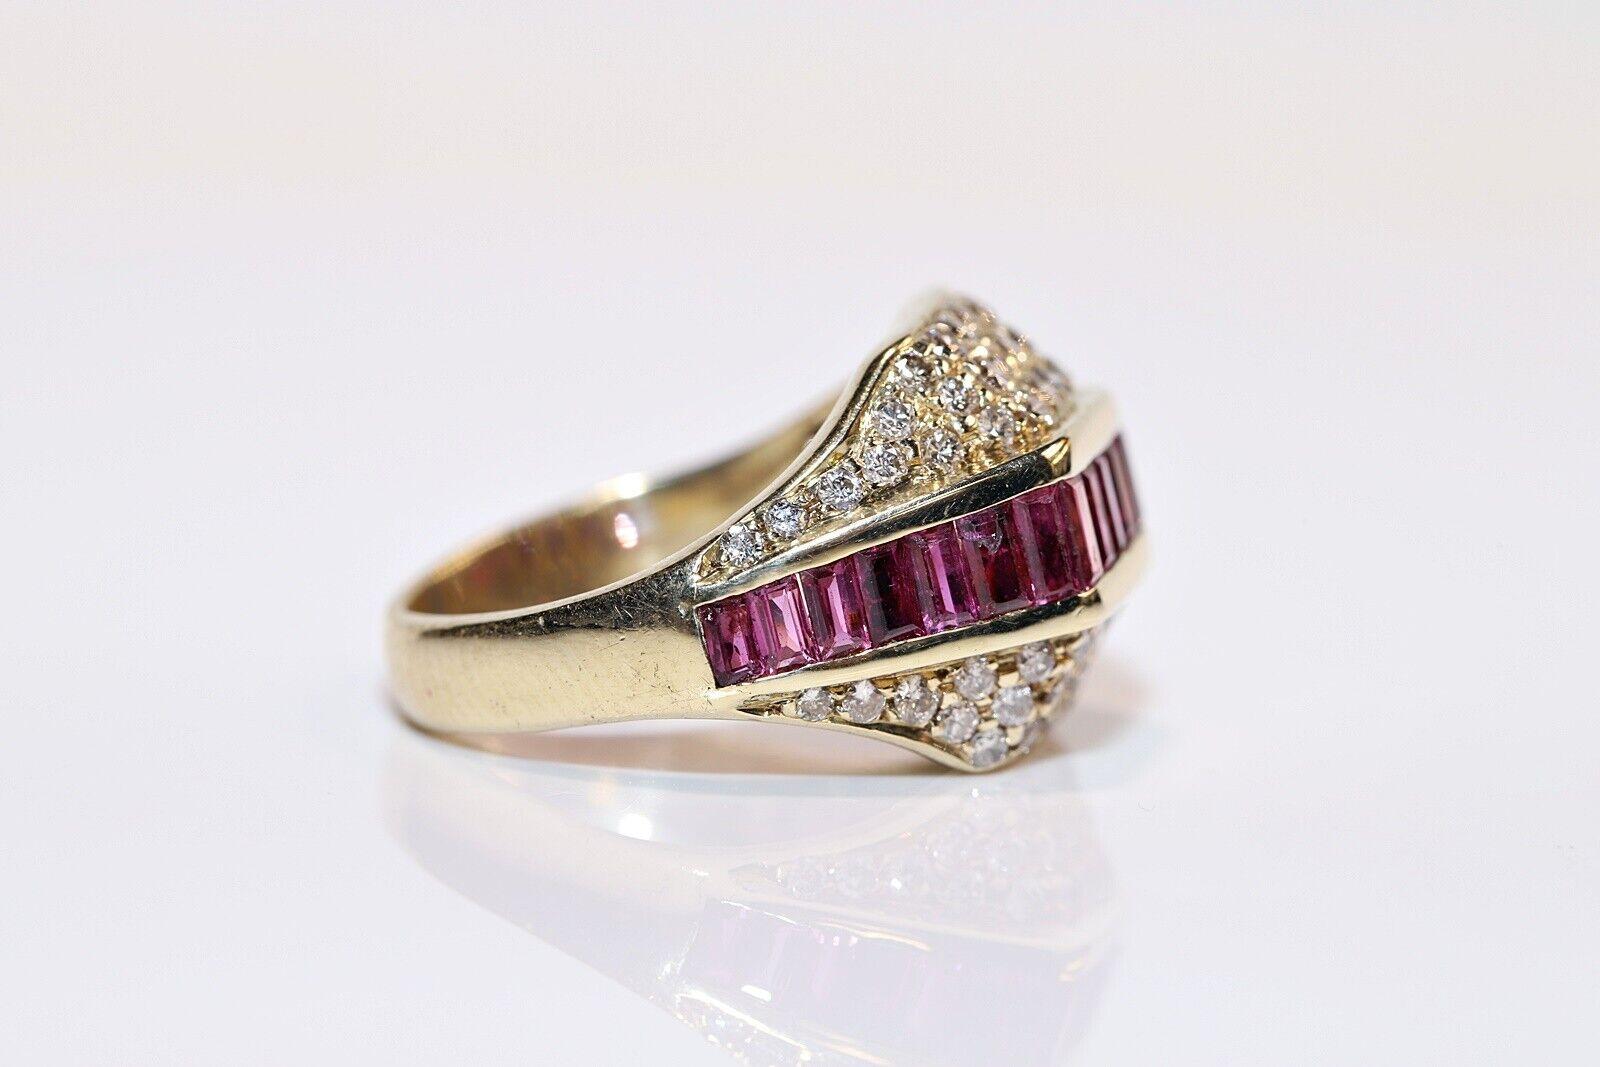 Brilliant Cut Vintage Circa 1970s 14k Gold Natural Diamond And Caliber Ruby Decorated Ring For Sale